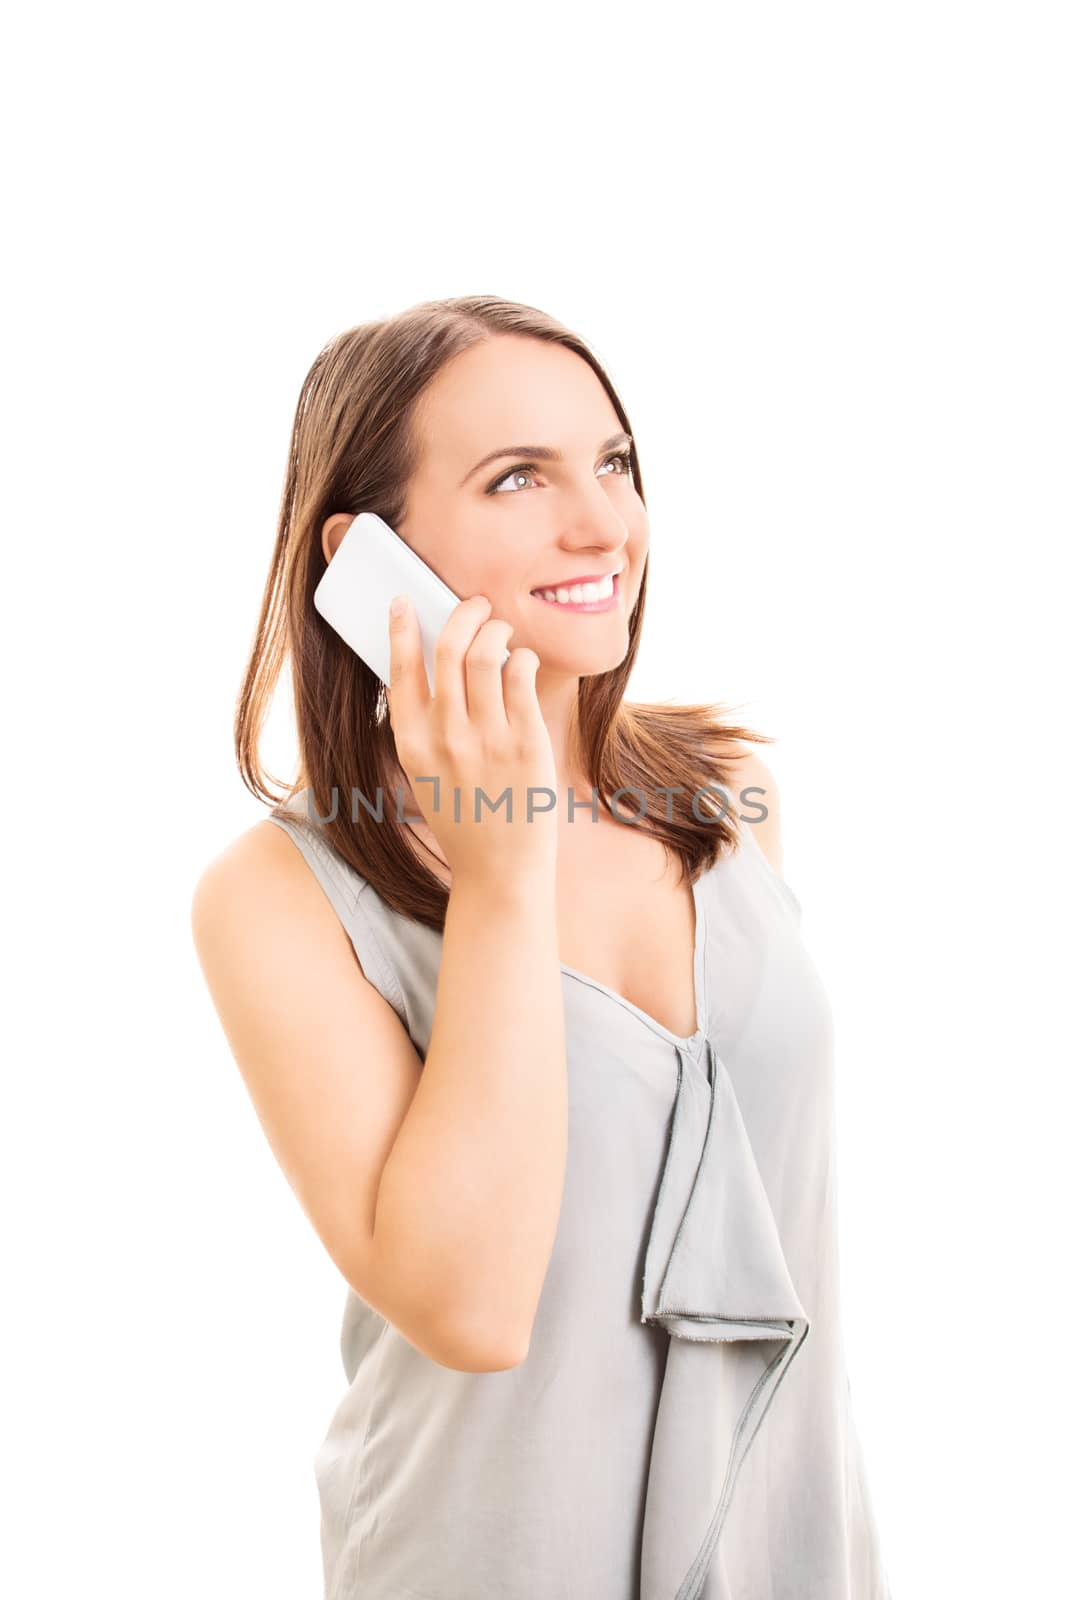 Smiling beautiful young woman talking on a phone, isolated on white background.